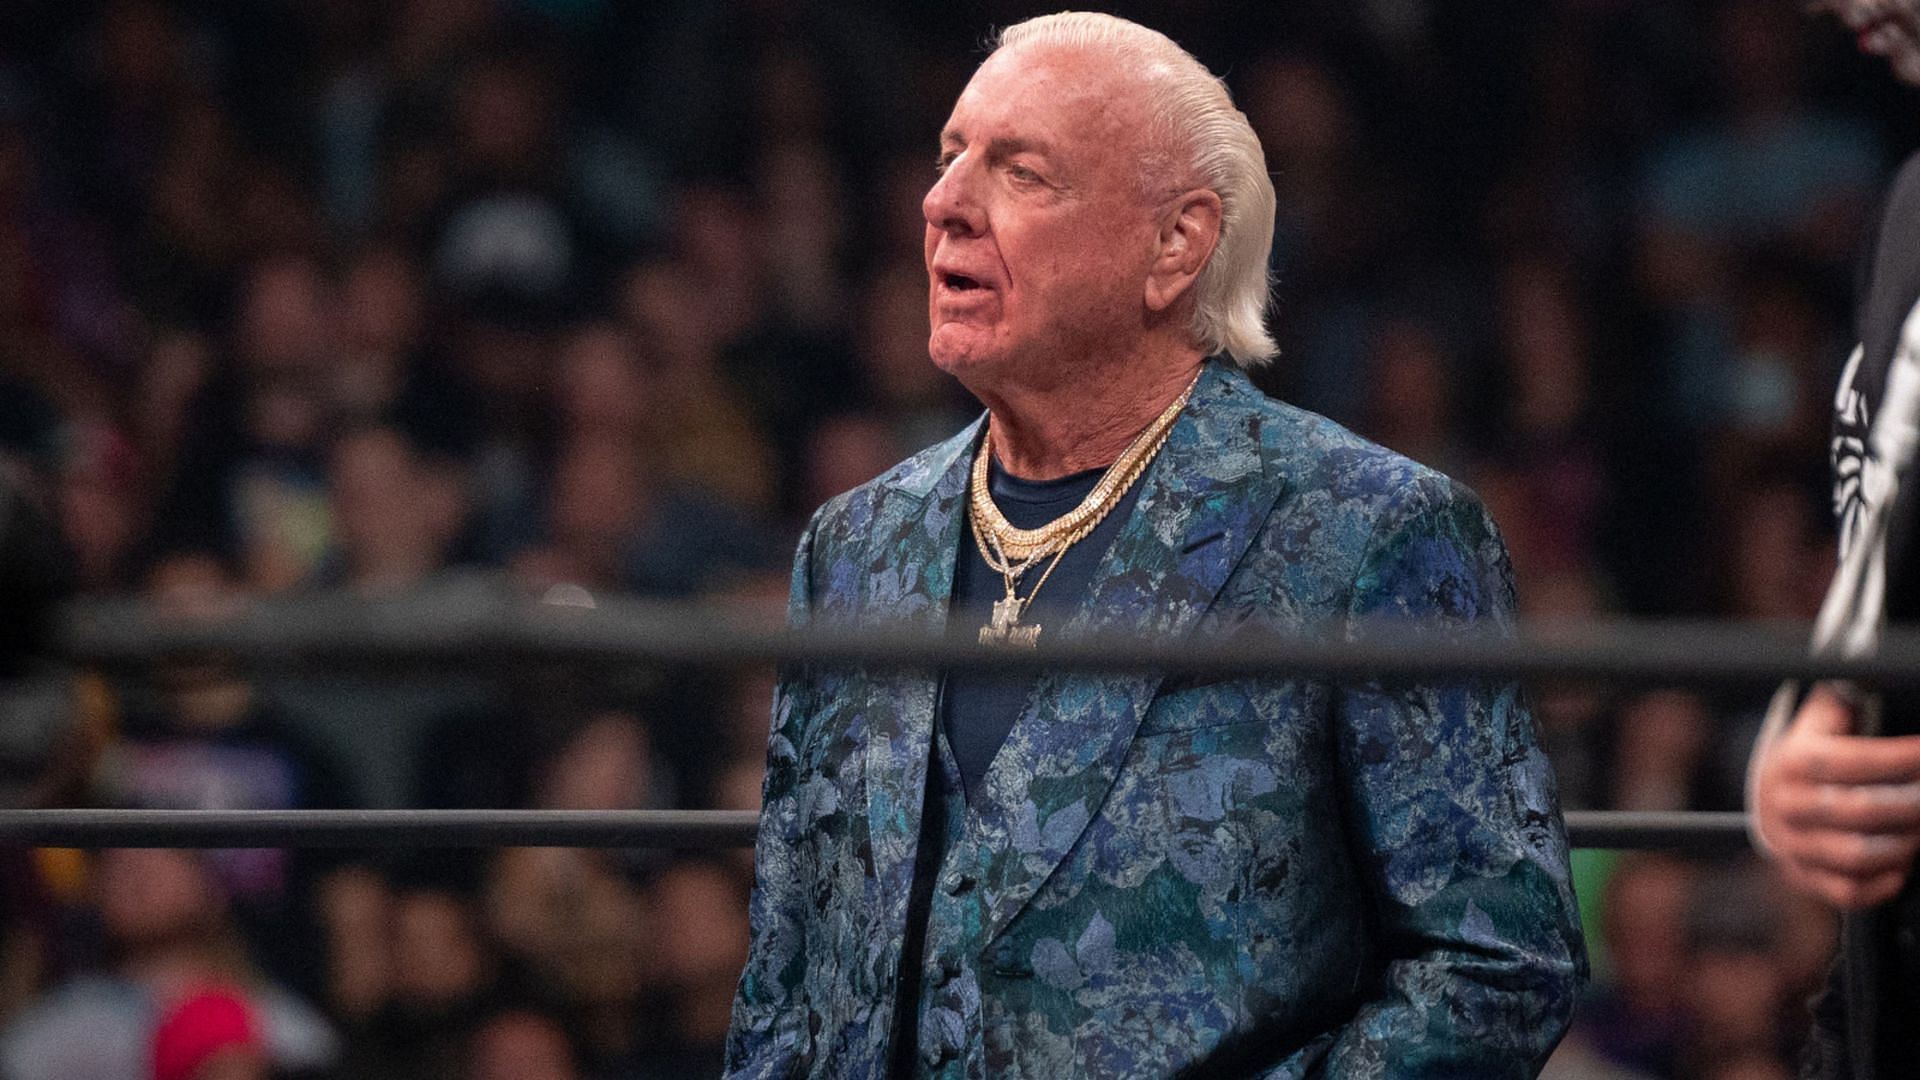 The Nature Boy received lots of concerned comments from fans